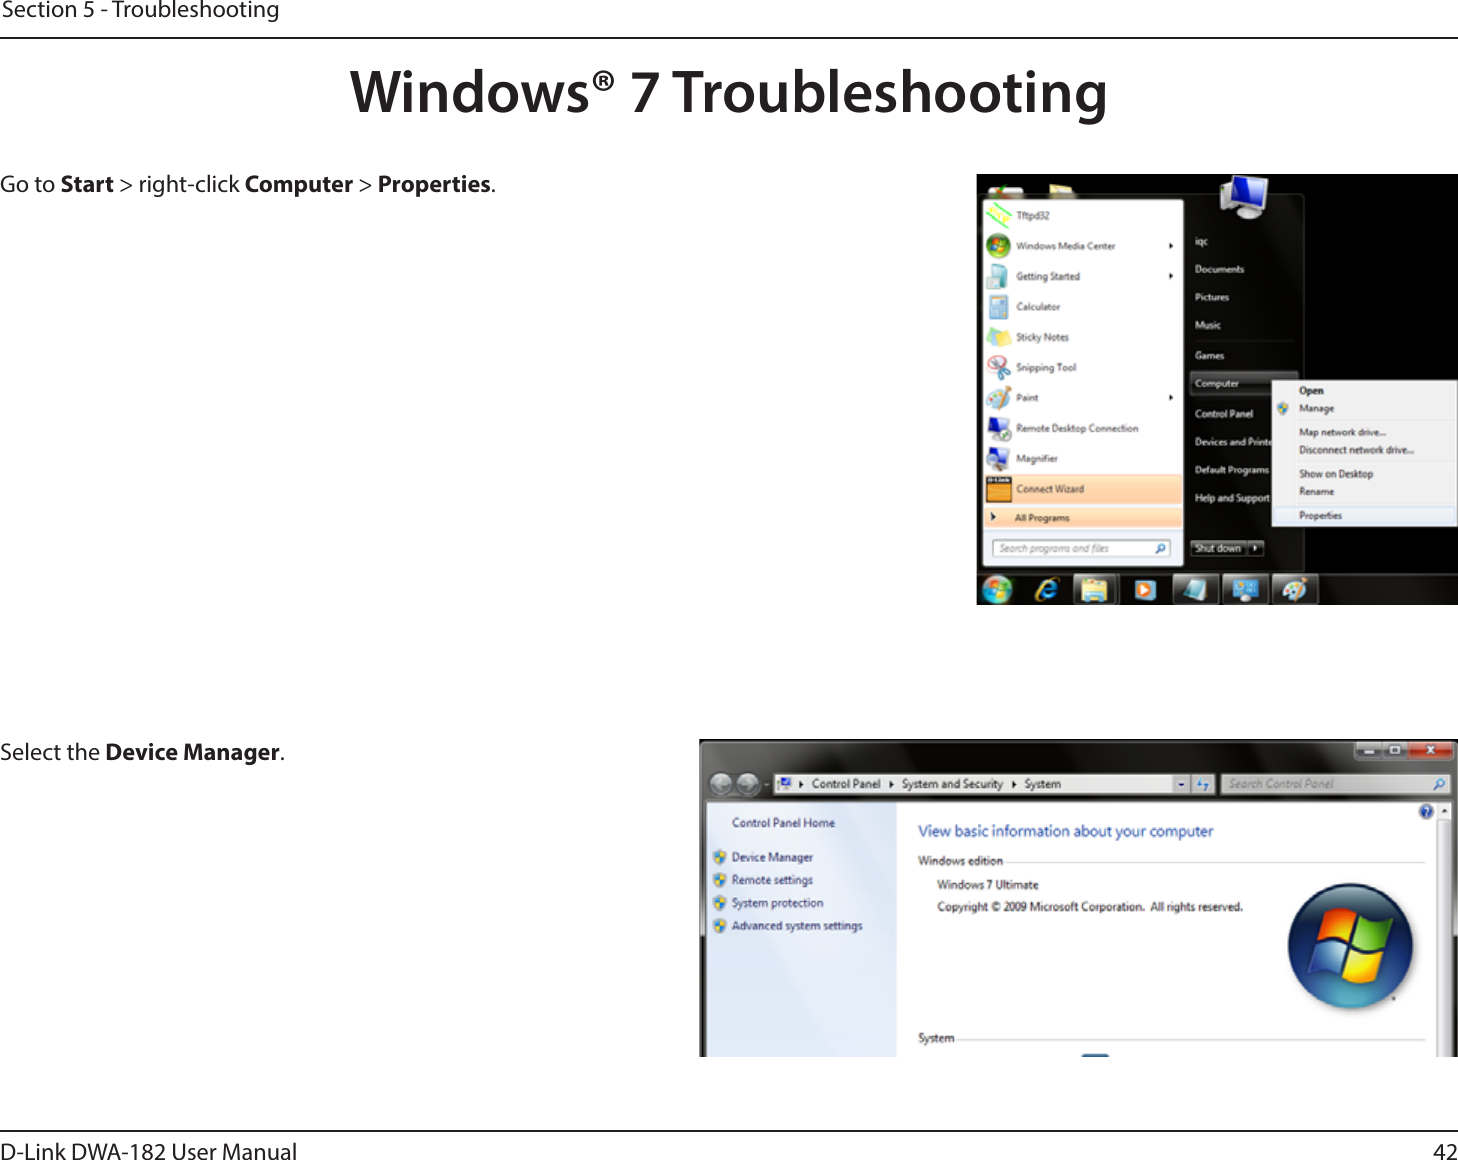 42D-Link DWA-182 User ManualSection 5 - TroubleshootingWindows® 7 TroubleshootingGo to Start &gt; right-click Computer &gt; Properties.Select the Device Manager.